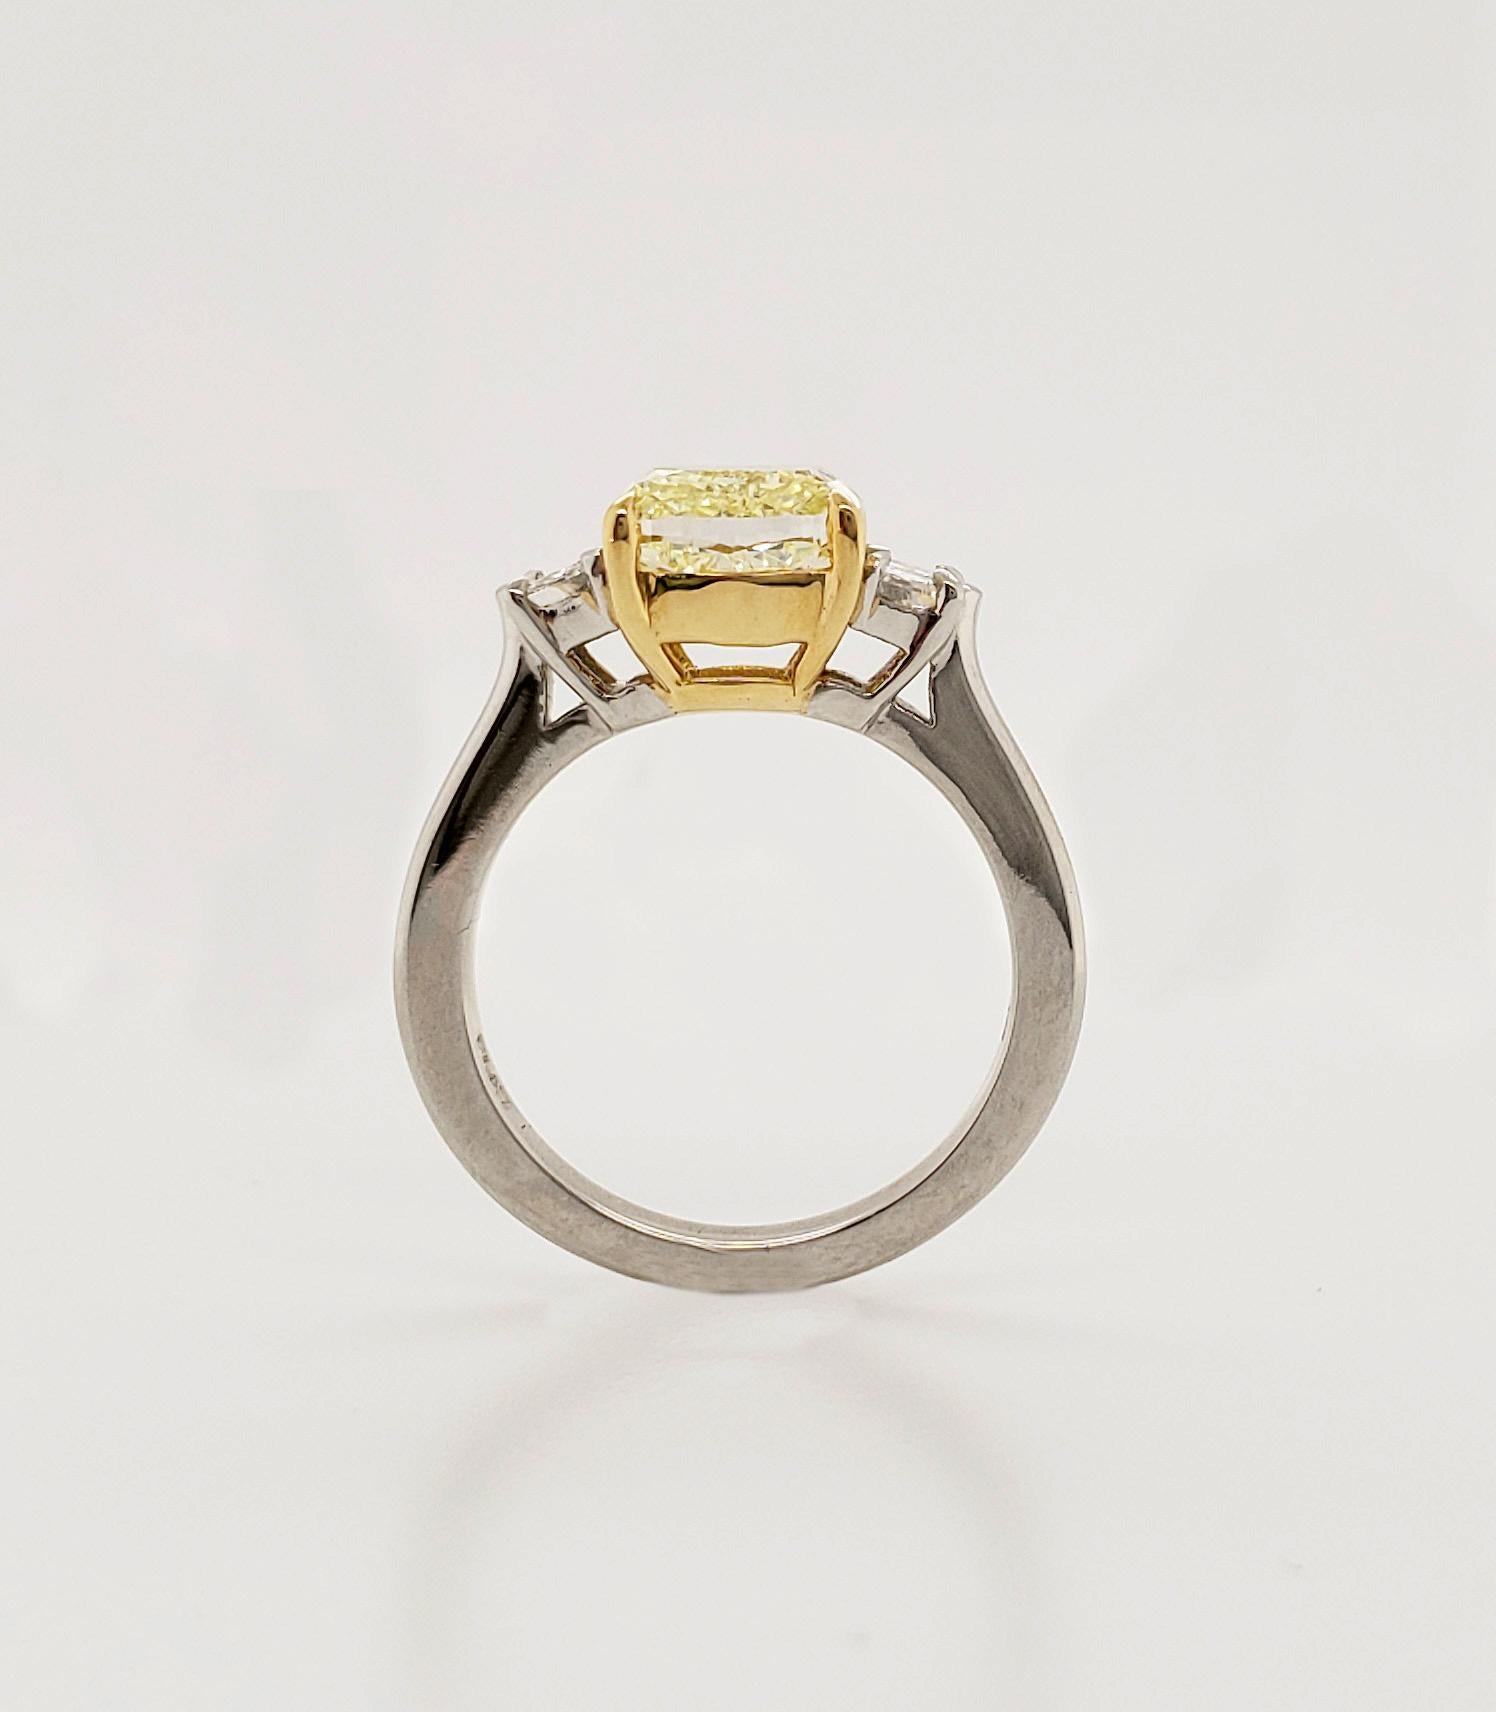 Contemporary Scarselli GIA 3 Carat VVS2 Fancy Light Yellow Diamond Engagement Ring Platinum  For Sale